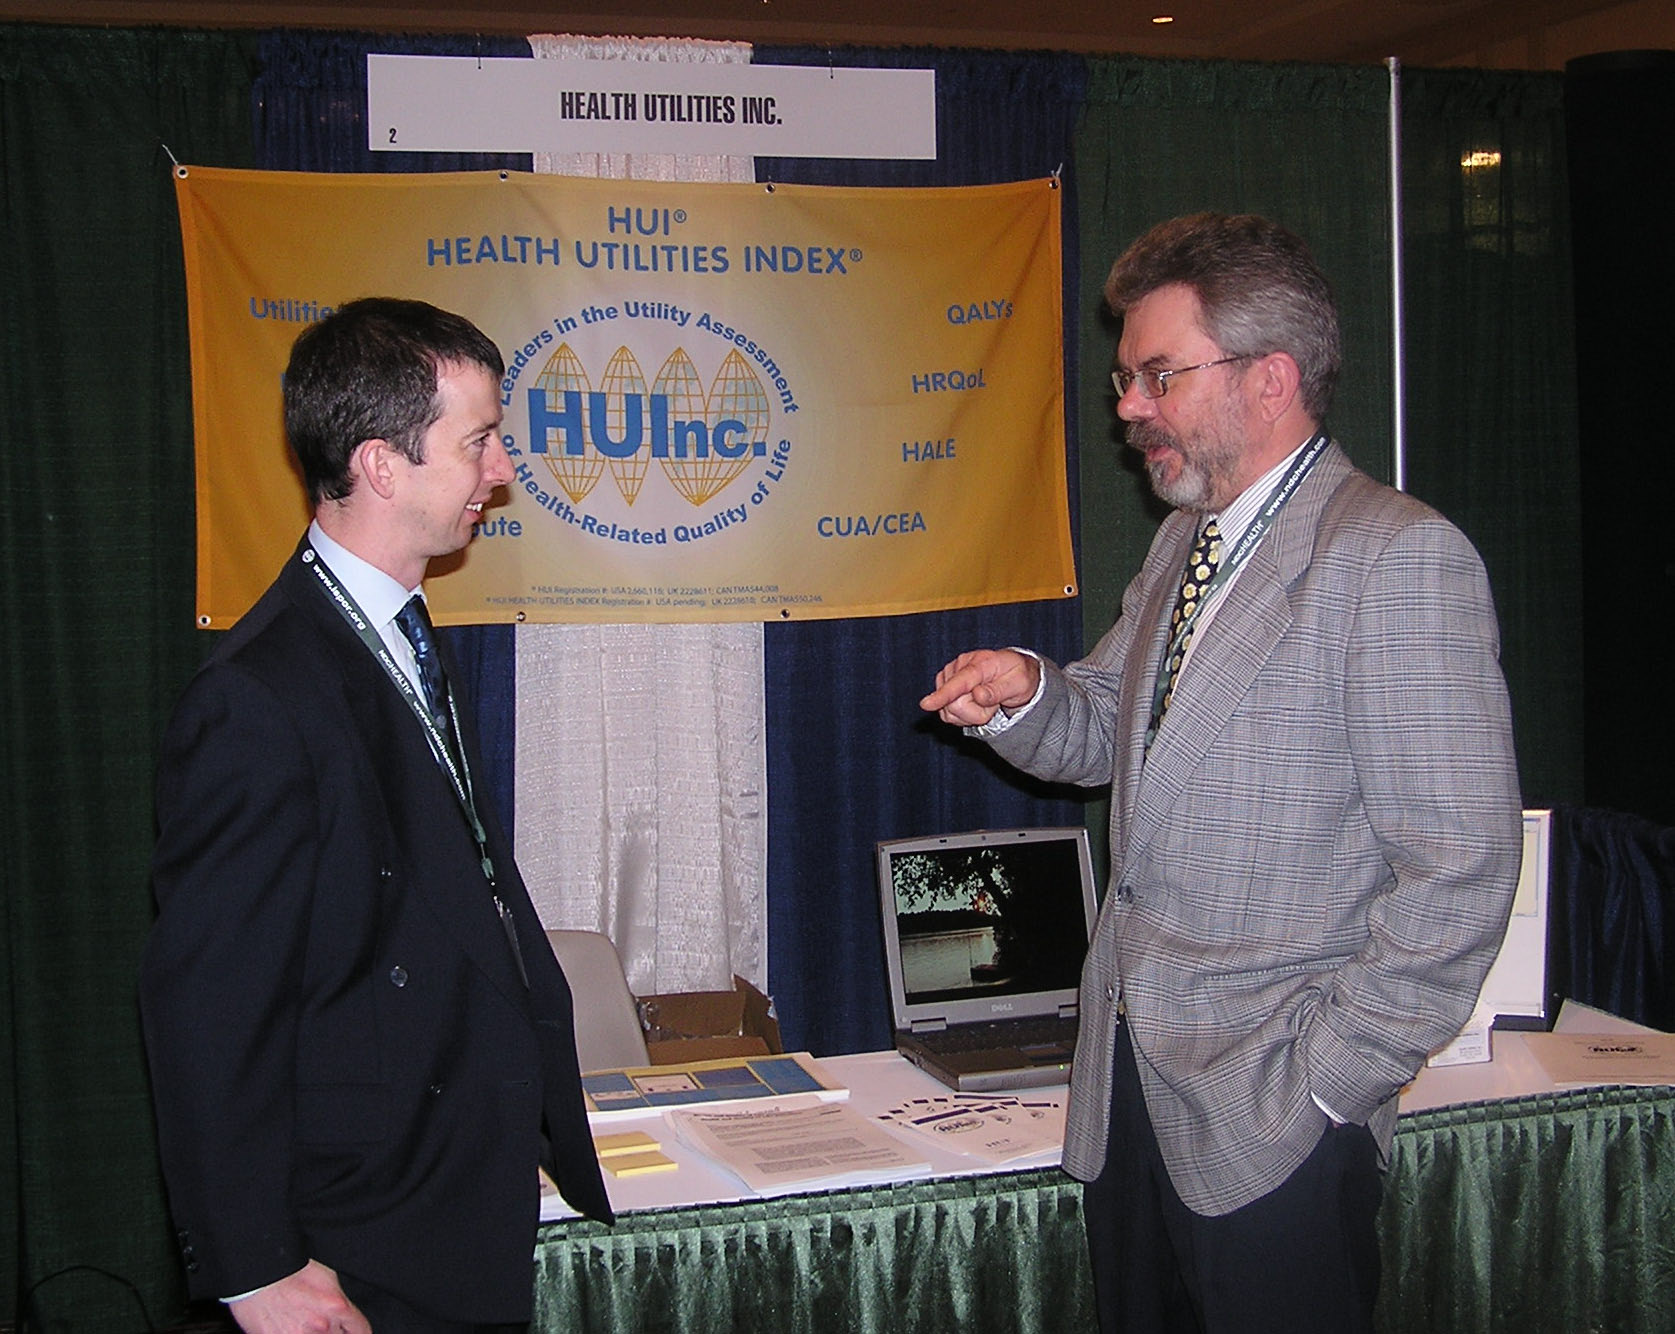 L to R - Chris McCabe and Bill Furlong discussing the UK HUI2 valuation project. International Society for Pharmacoeconomics and Outcomes Research - ISPOR, May 2003, Arlington, VA, USA.